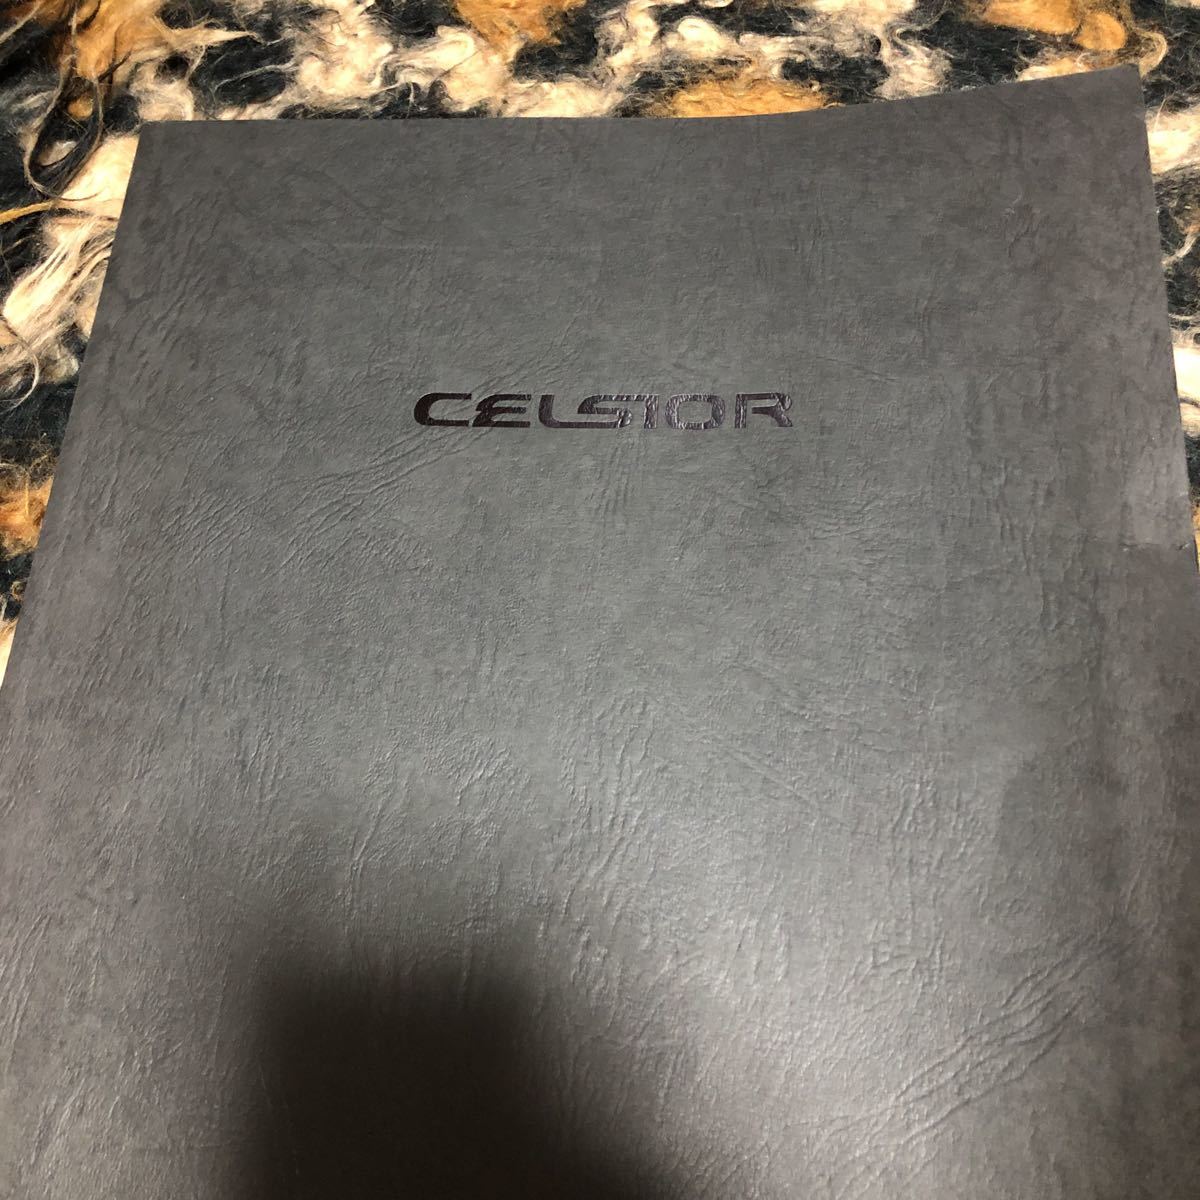 20 Celsior latter term catalog Celsior 20 latter term period thing crack equipped 